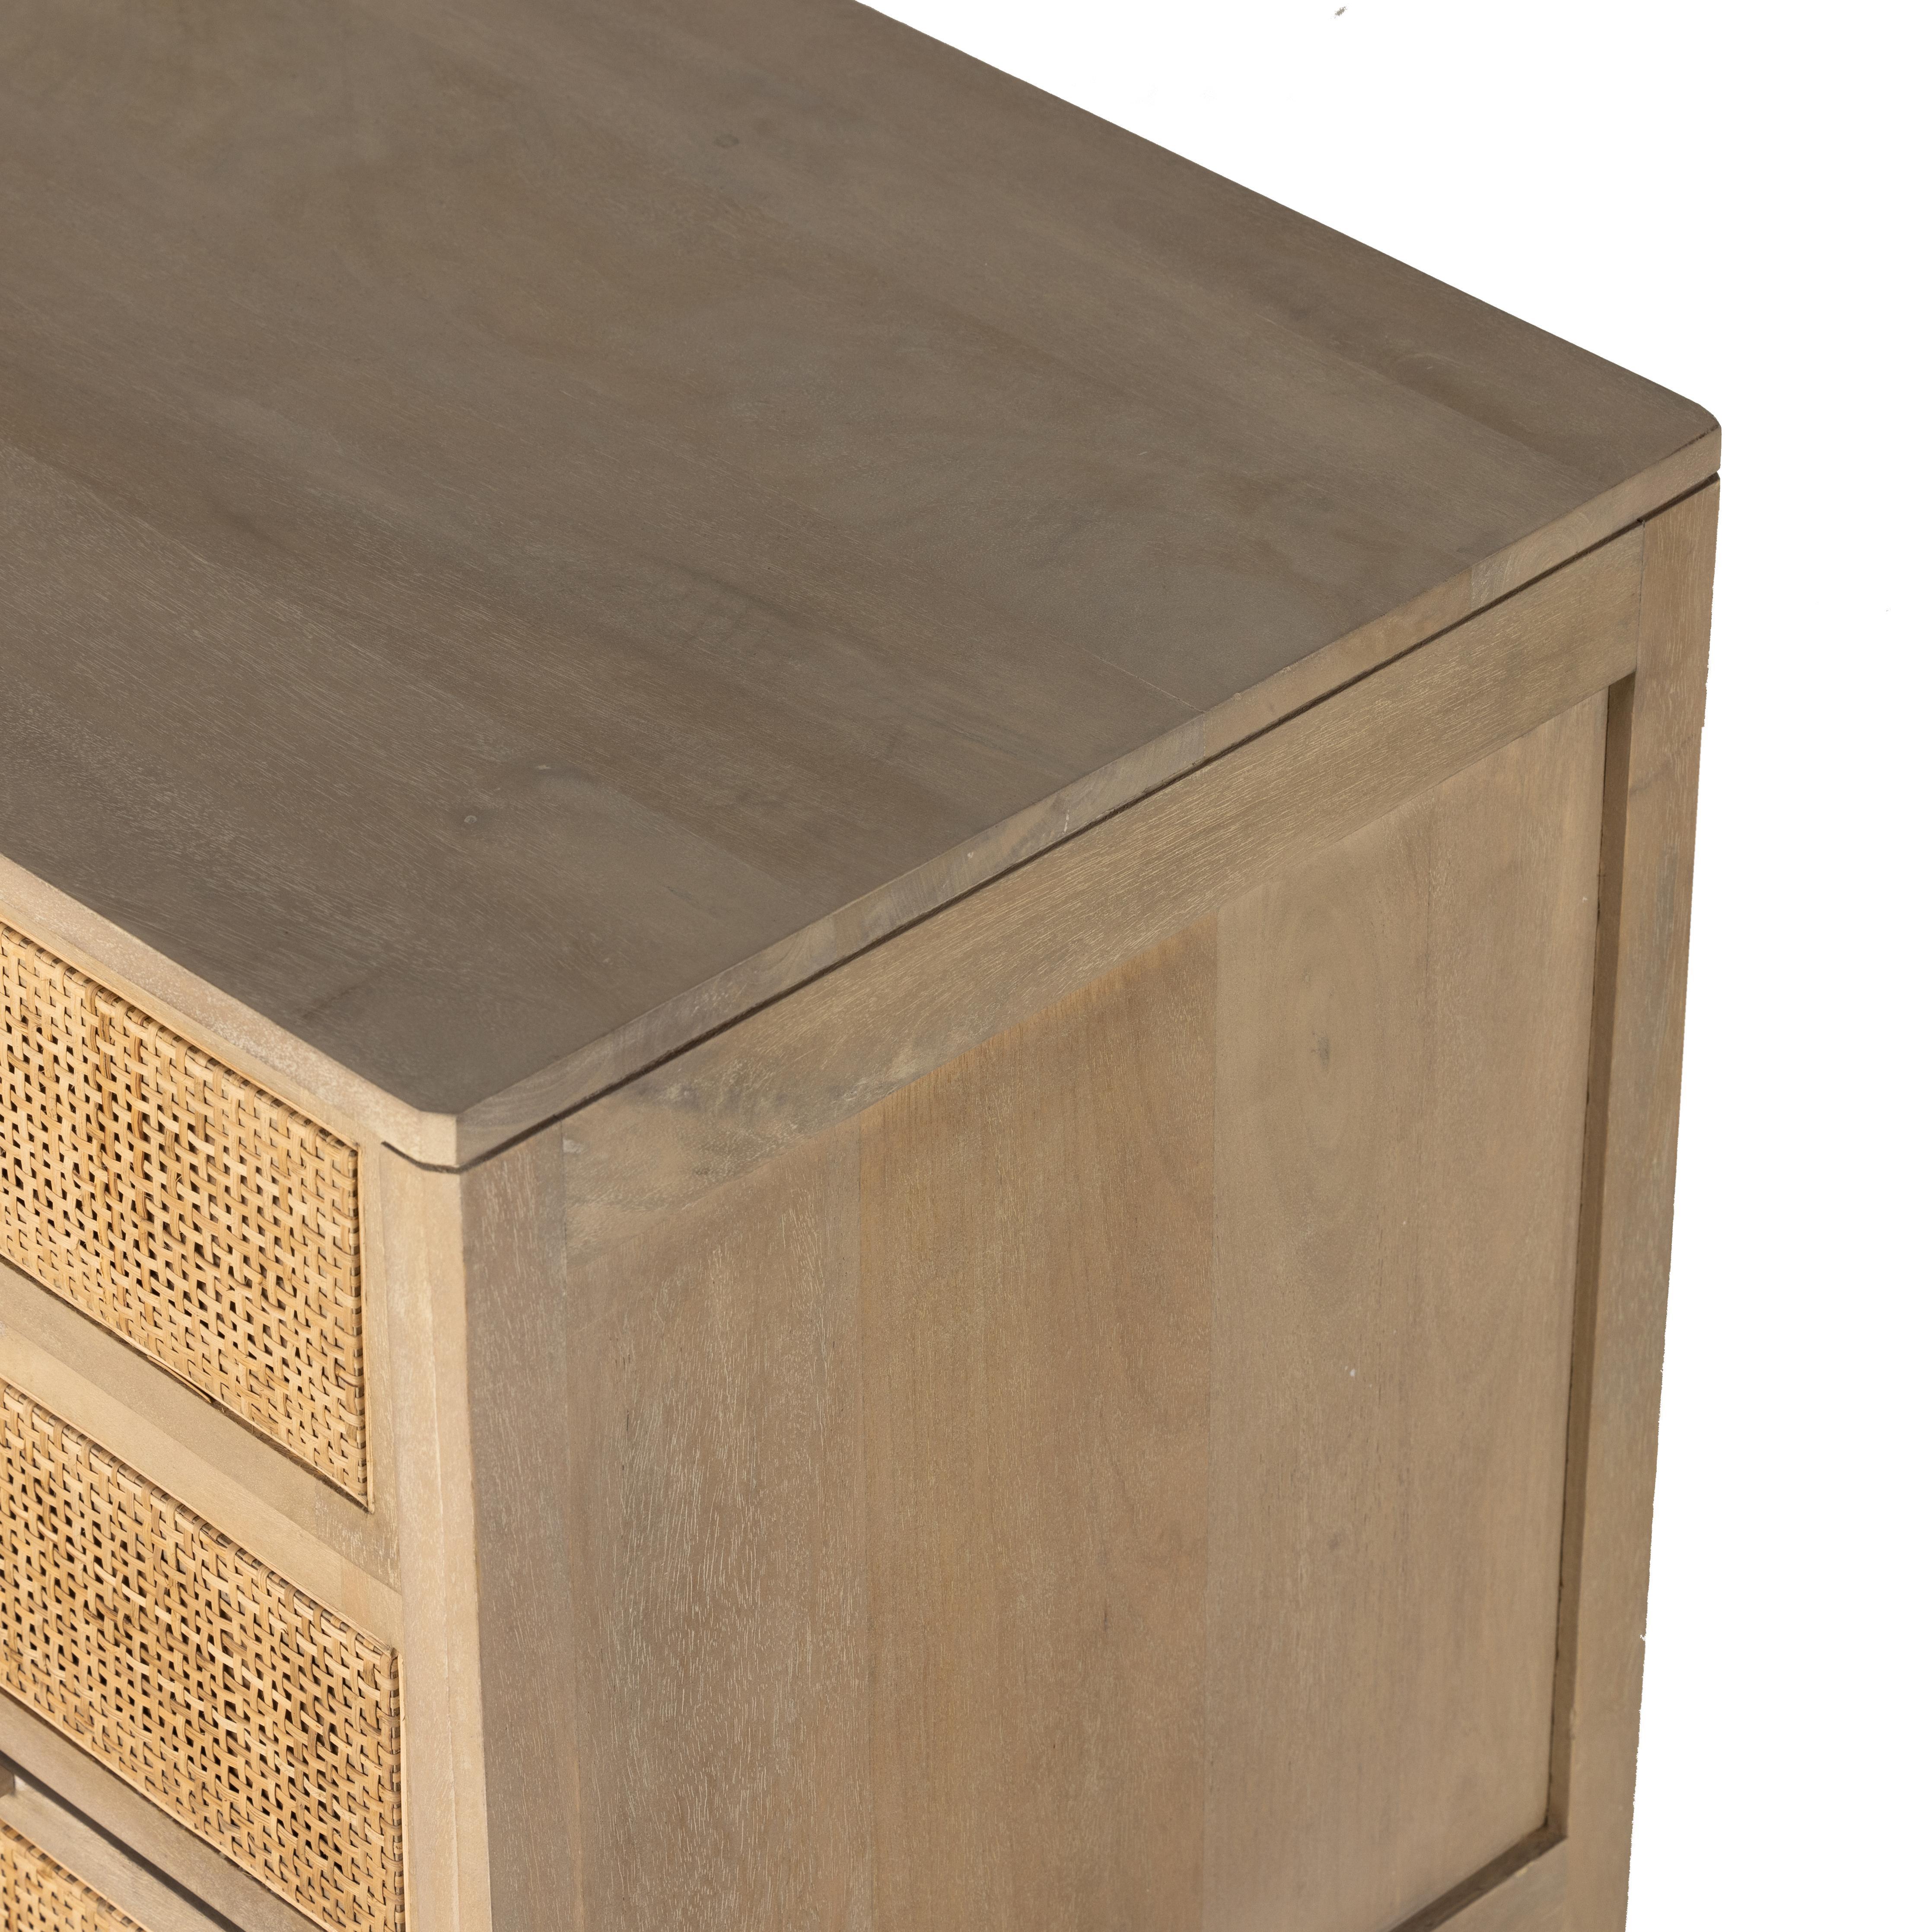 Natural mango frames inset woven cane, for a light, textural look with organic allure. Three spacious drawers provide plenty of closed storage. Amethyst Home provides interior design, new home construction design consulting, vintage area rugs, and lighting in the Monterey metro area.